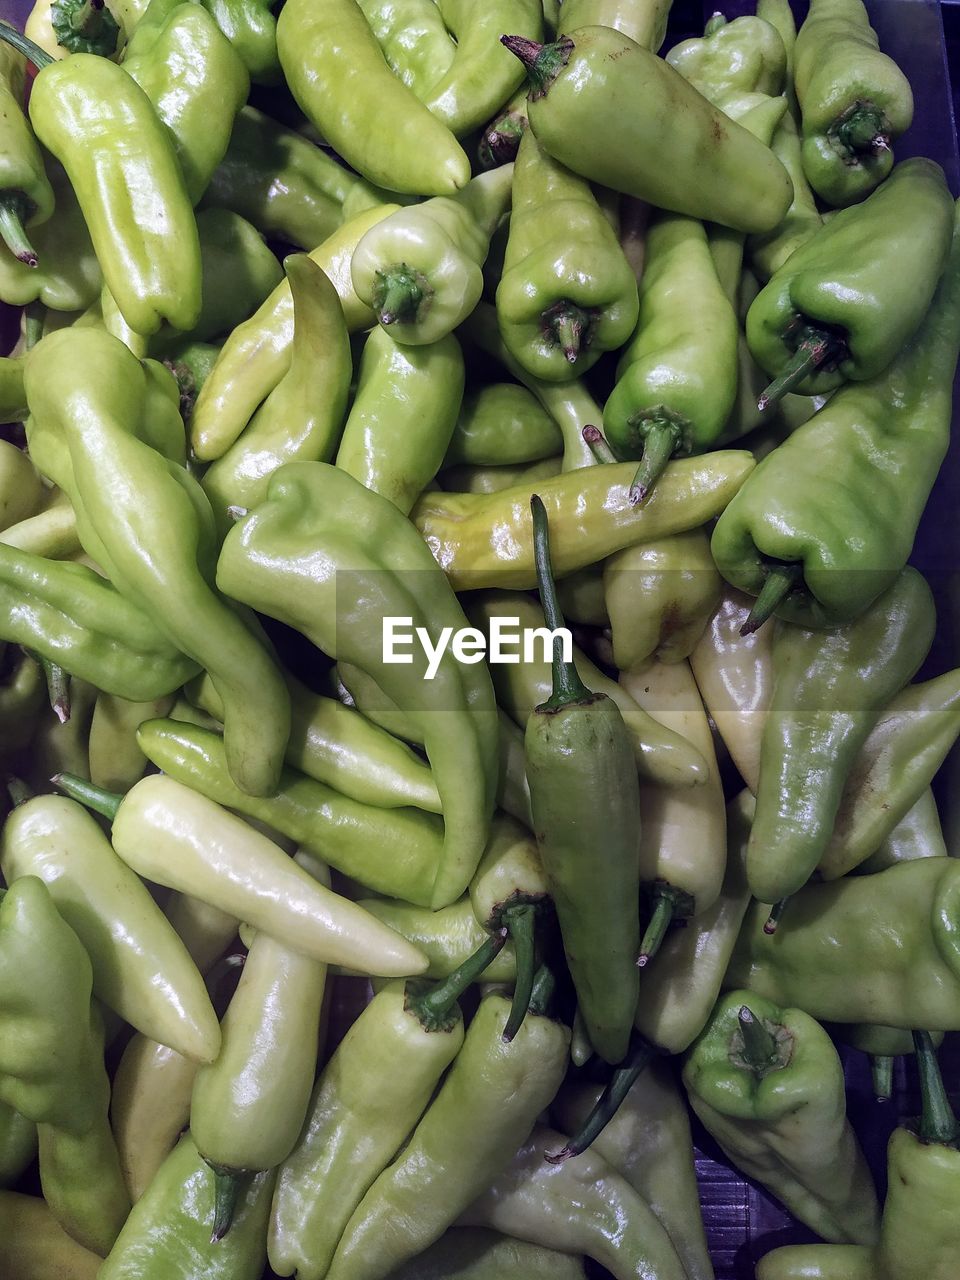 FULL FRAME SHOT OF GREEN CHILI PEPPERS FOR SALE